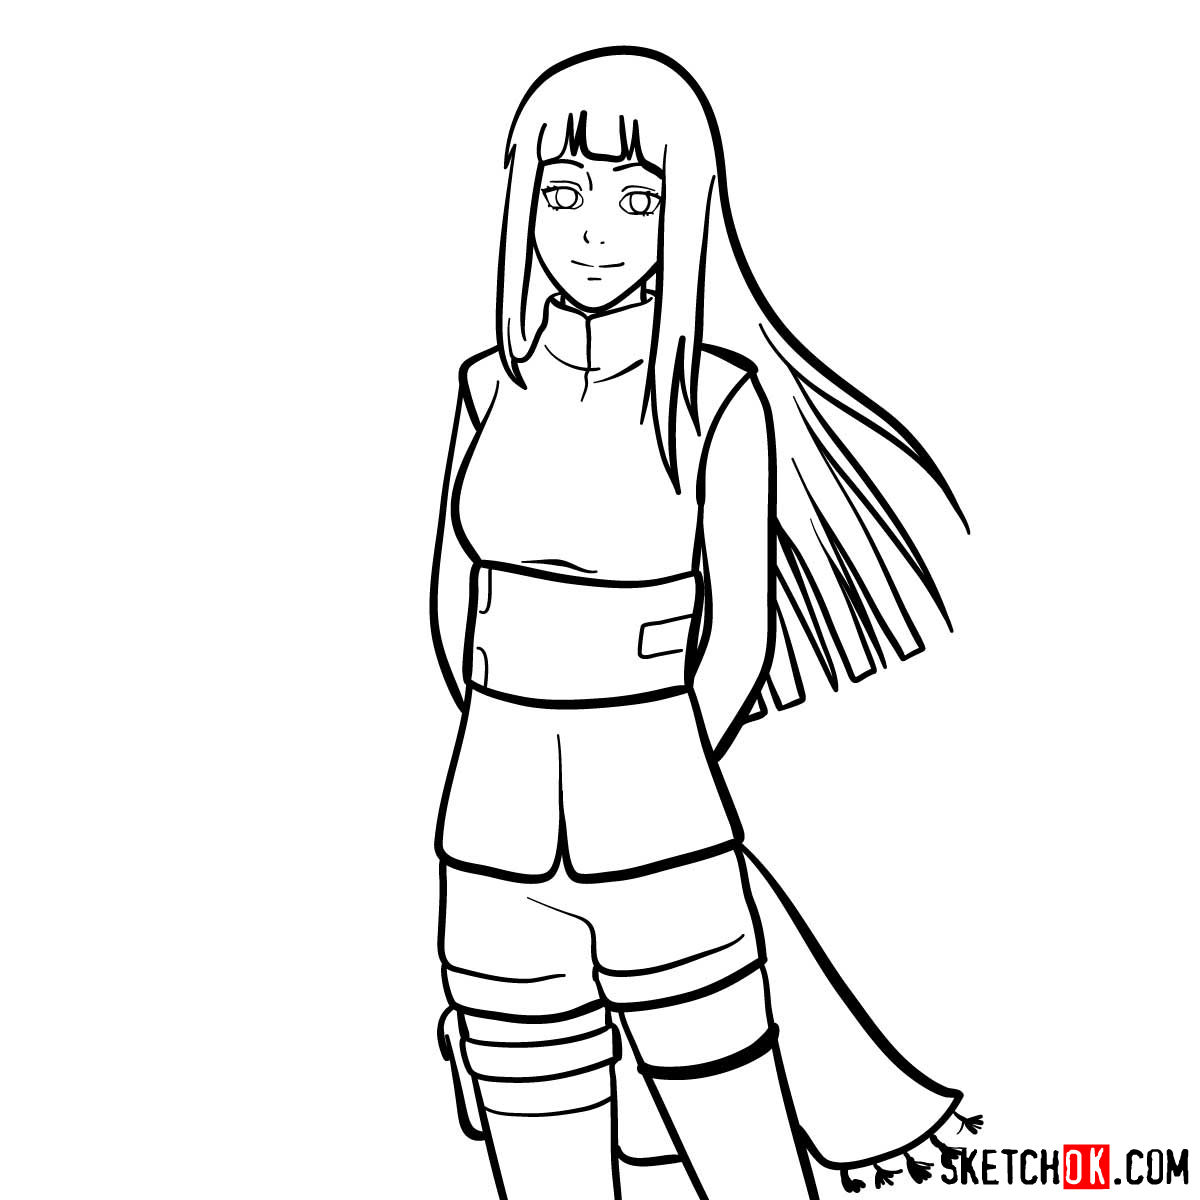 How to draw Hinata from Naruto anime - step 12